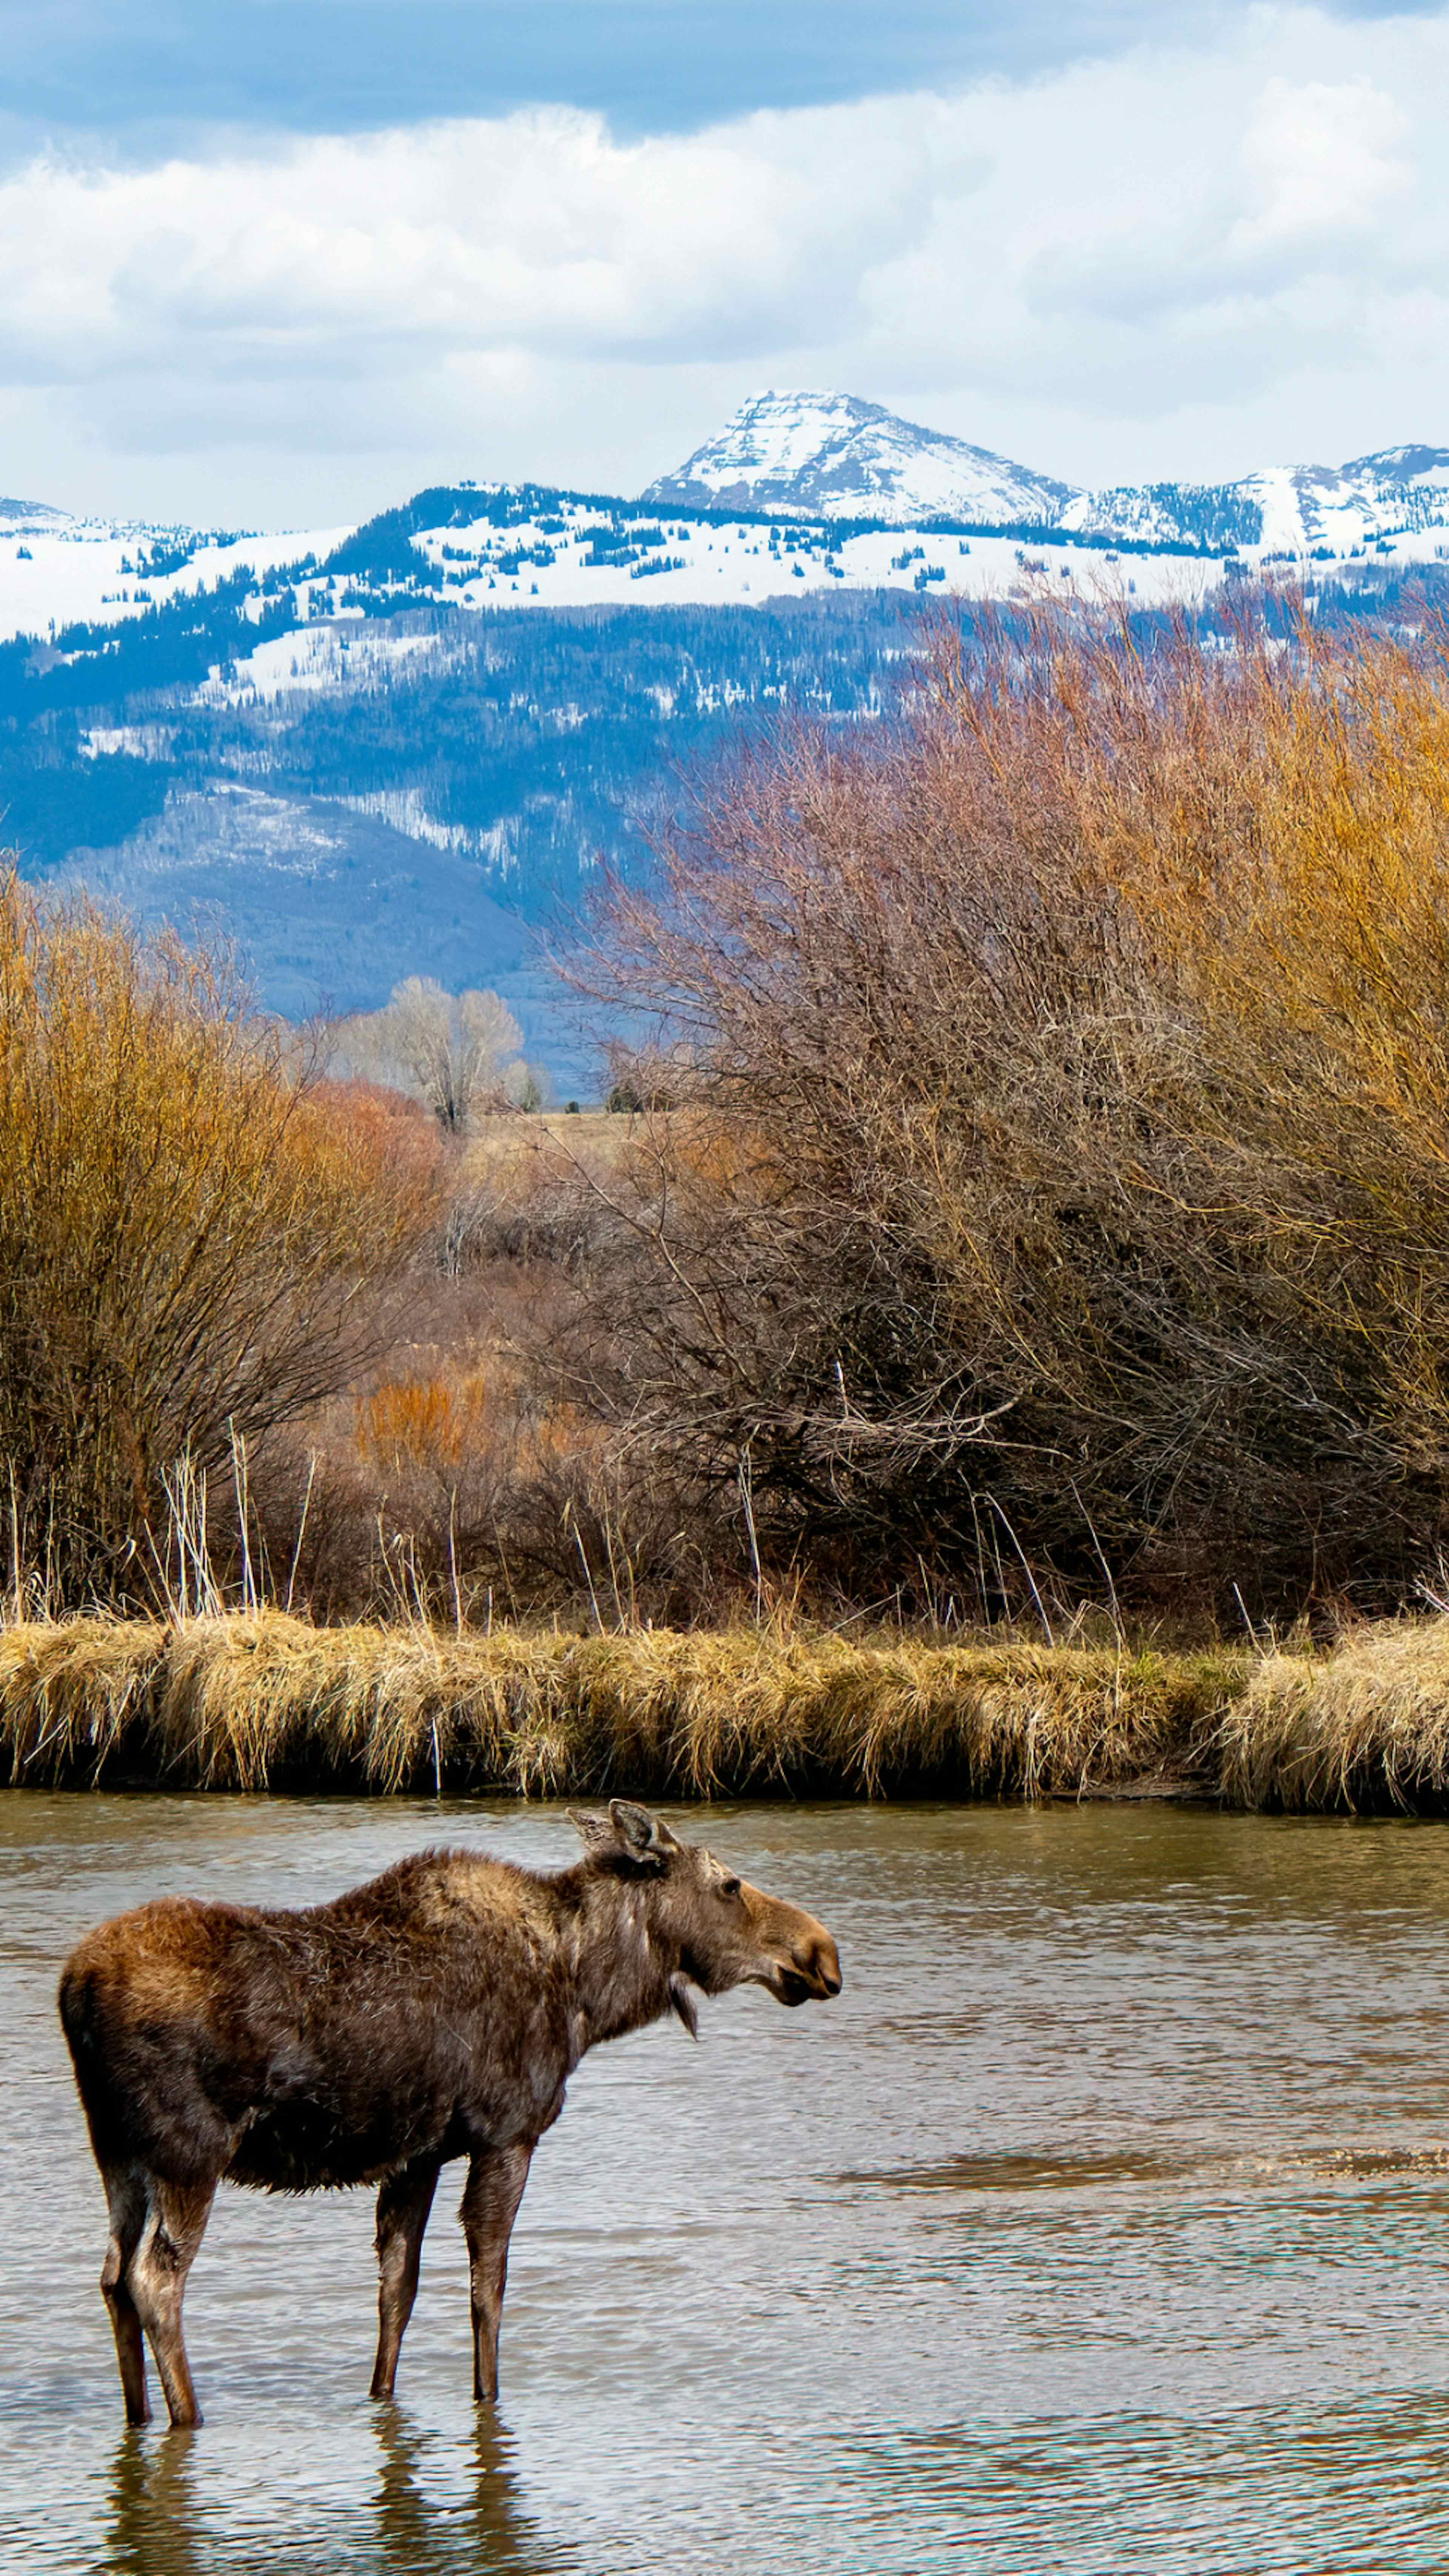 A moose stands in the Teton River in front of the Teton Mountain Range.